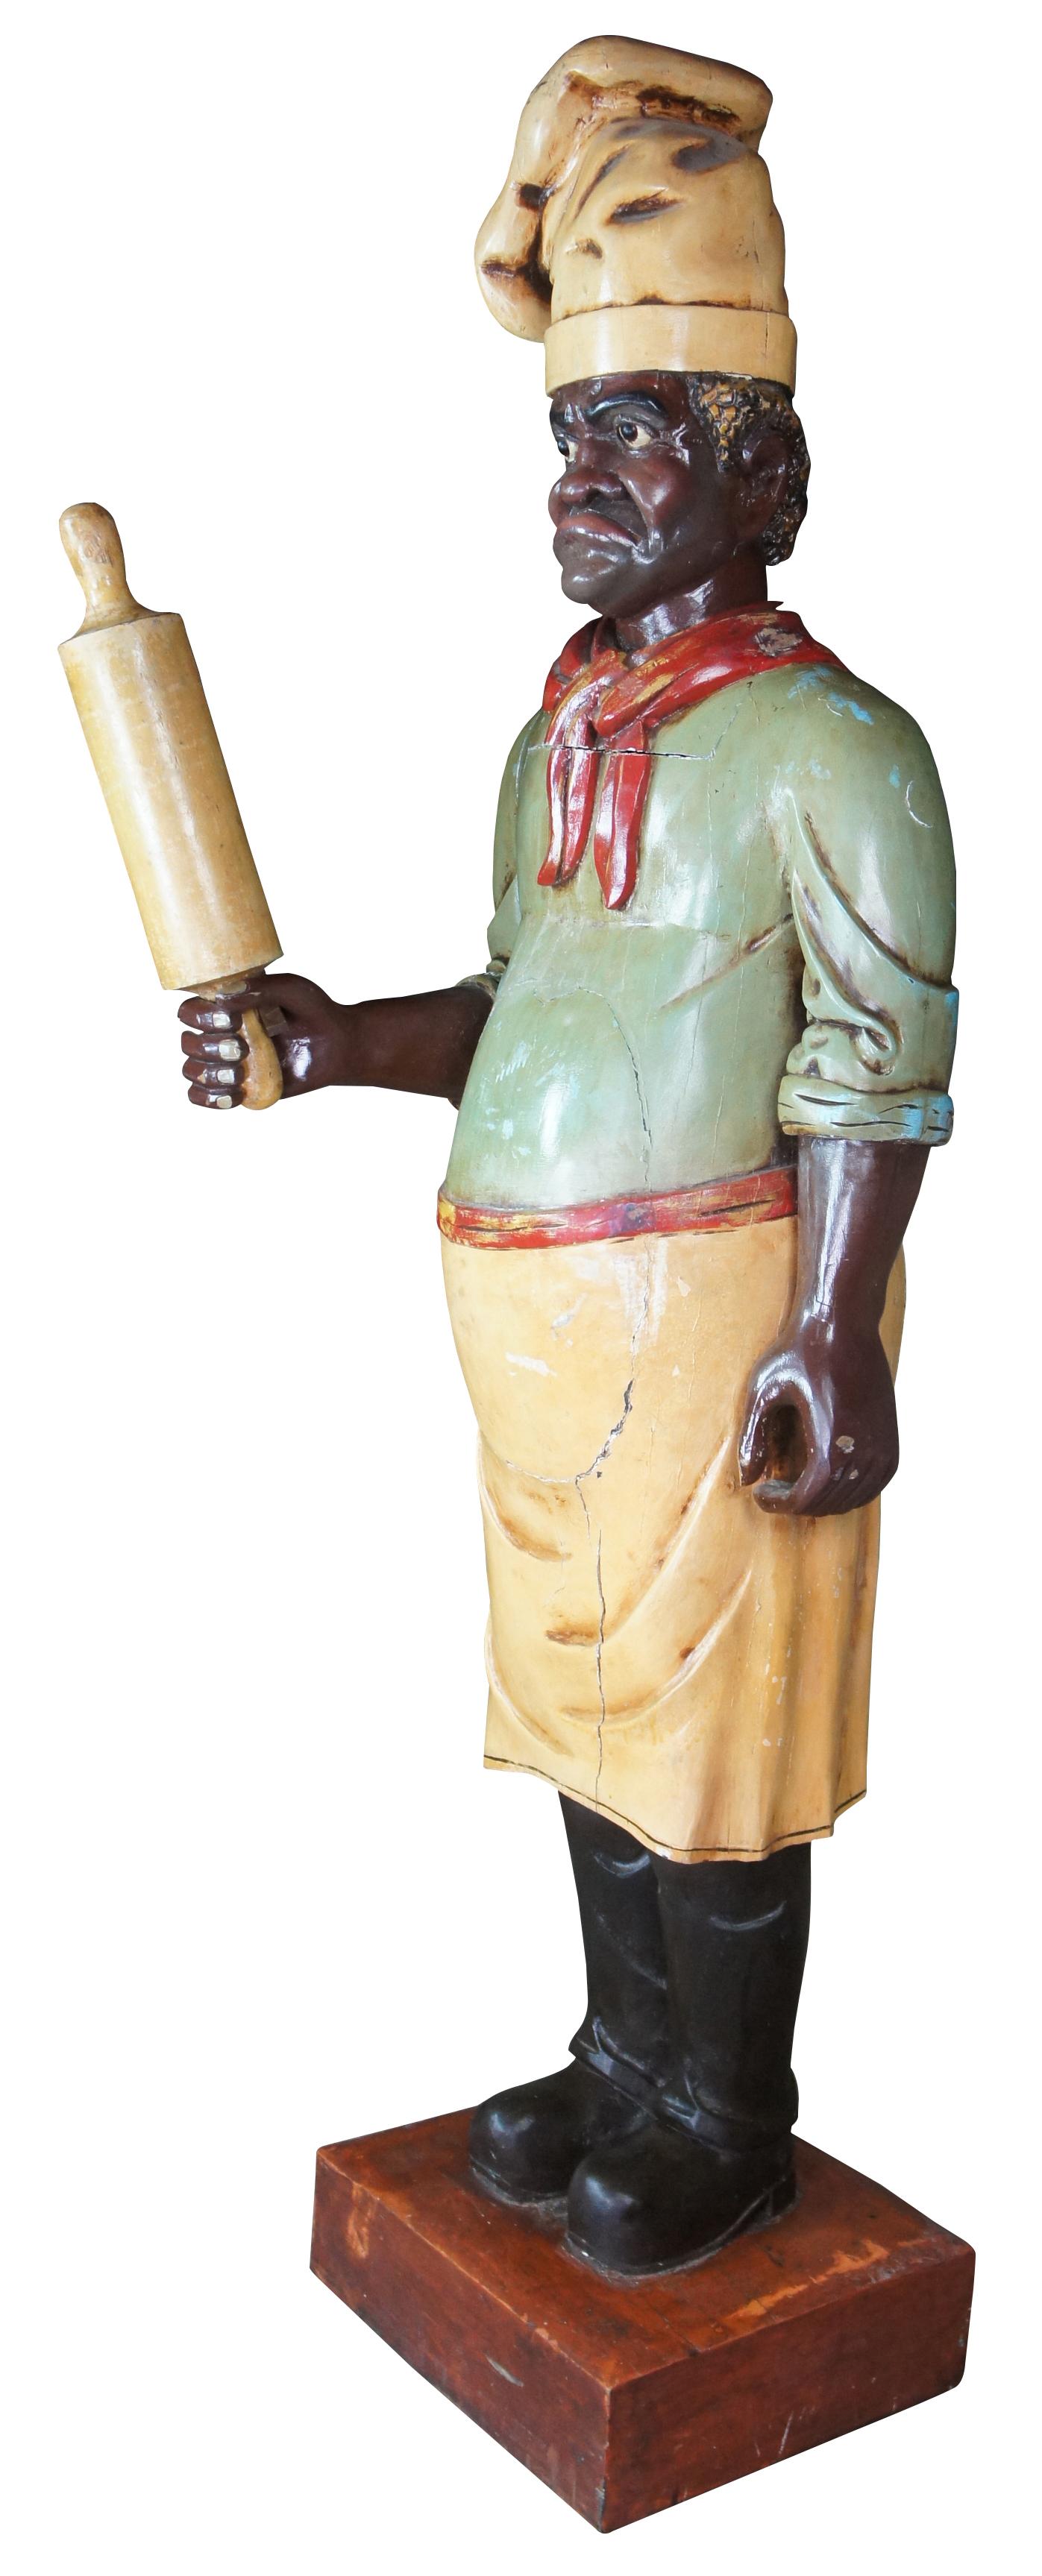 Monumental antique life size chef or baker statue. Carved of wood in the style of a cigar store figure, featuring a tall chef with traditional French kitchen attire holding a rolling pin. Acquired in France in the 1980s from an old restaurant where